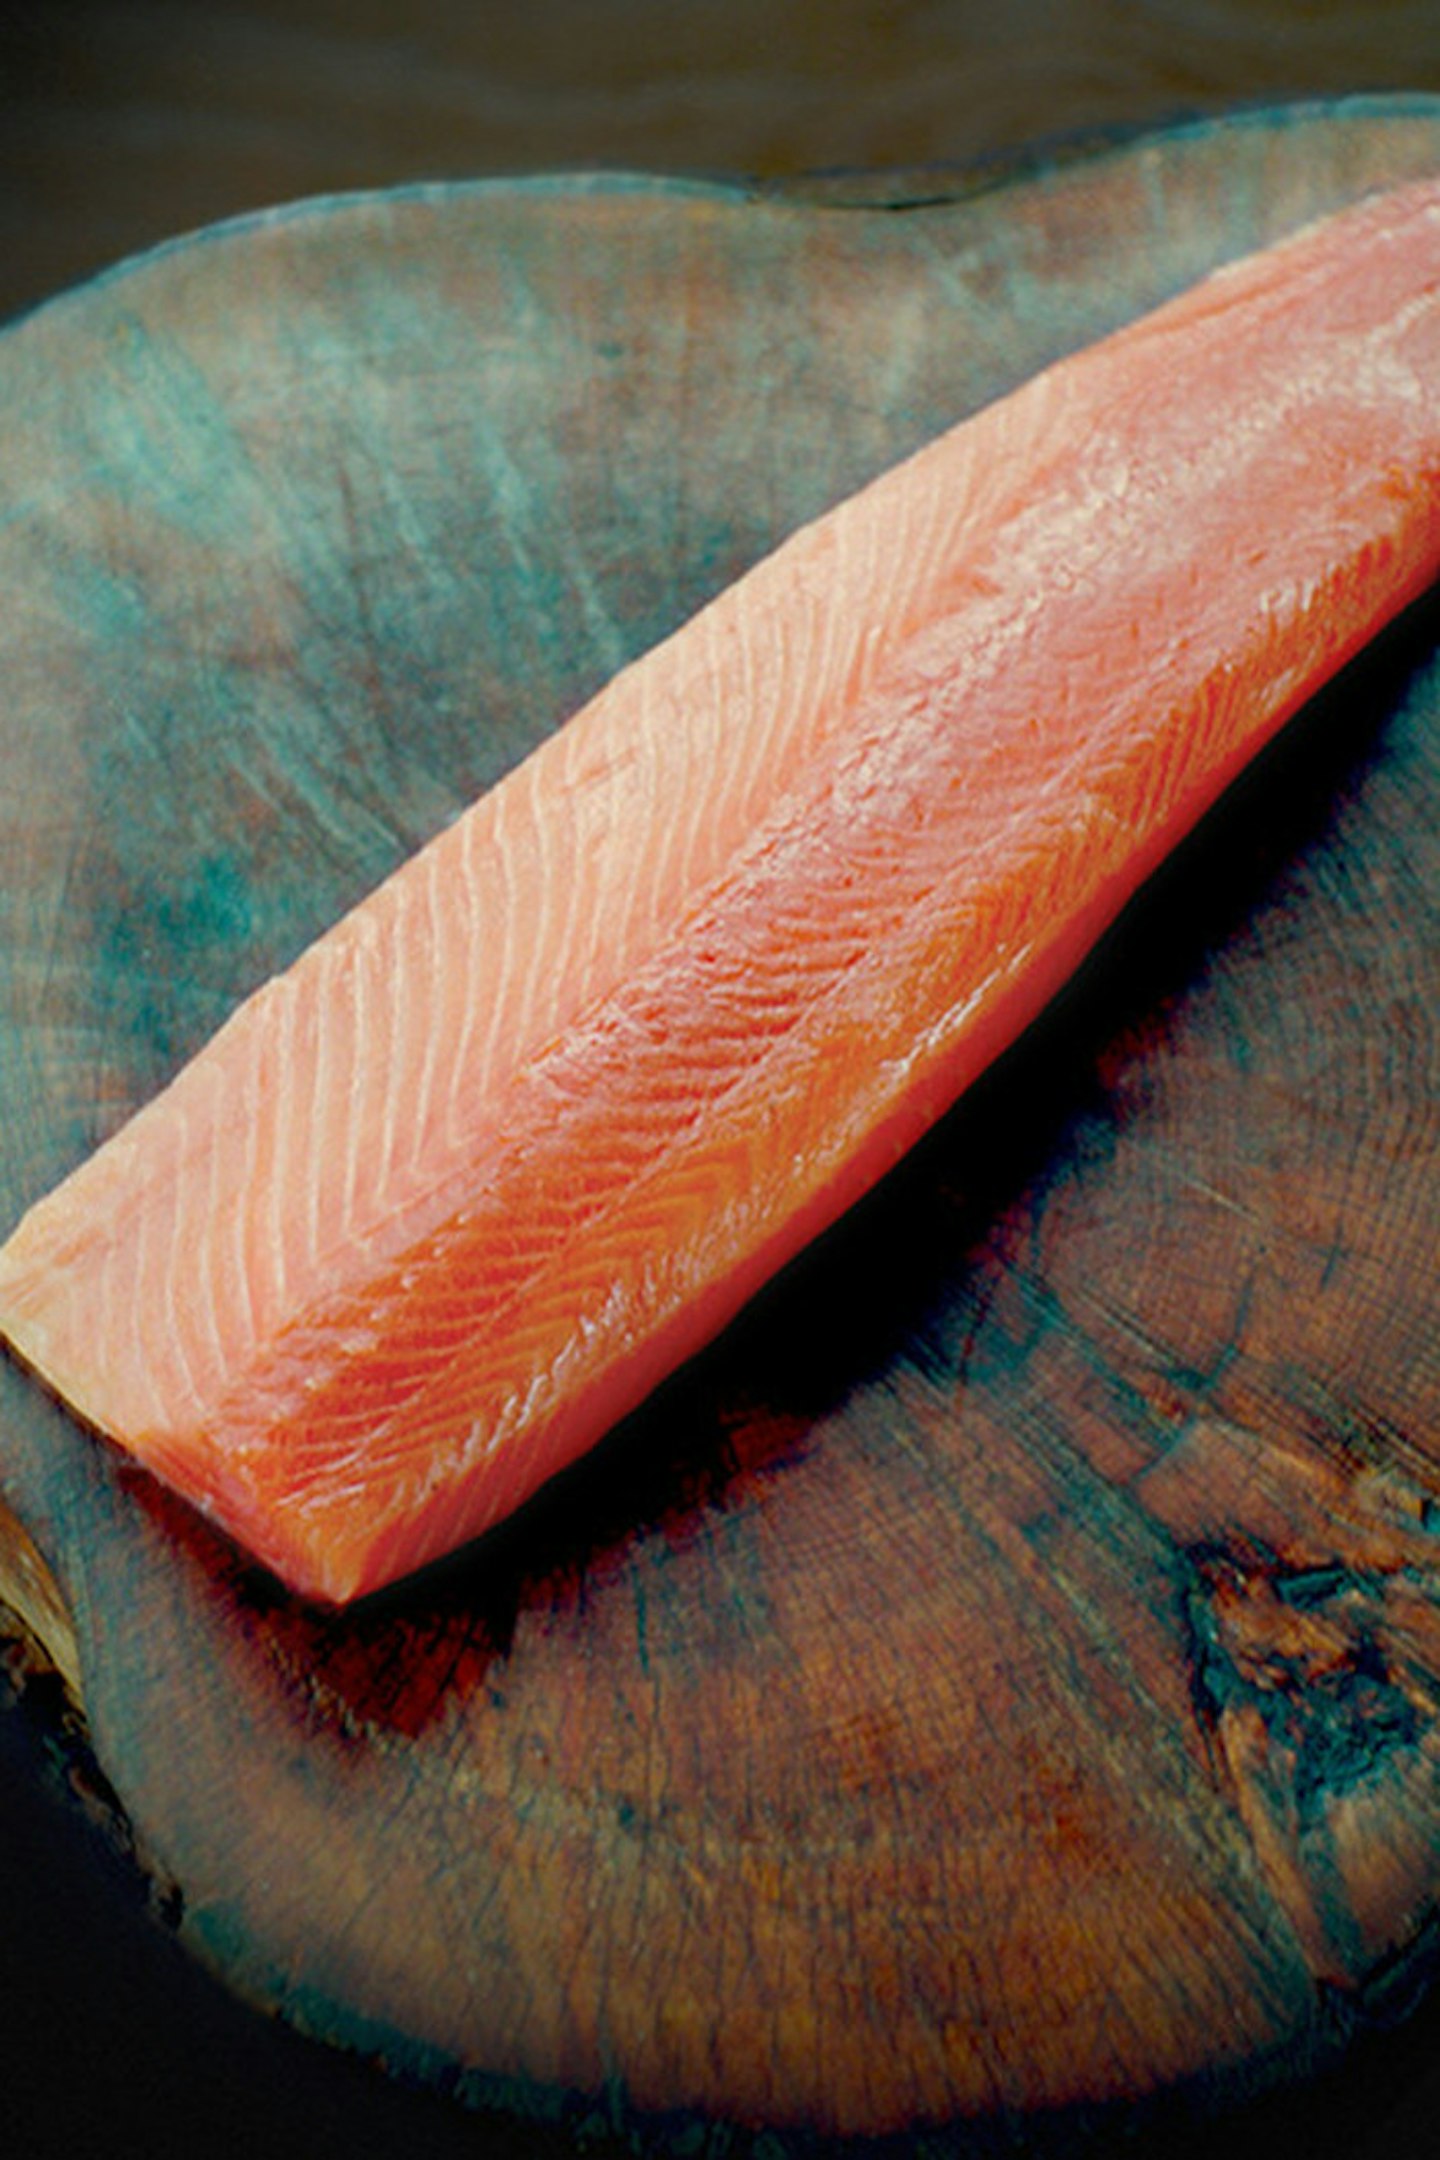 1. THE BEST SMOKED SALMON